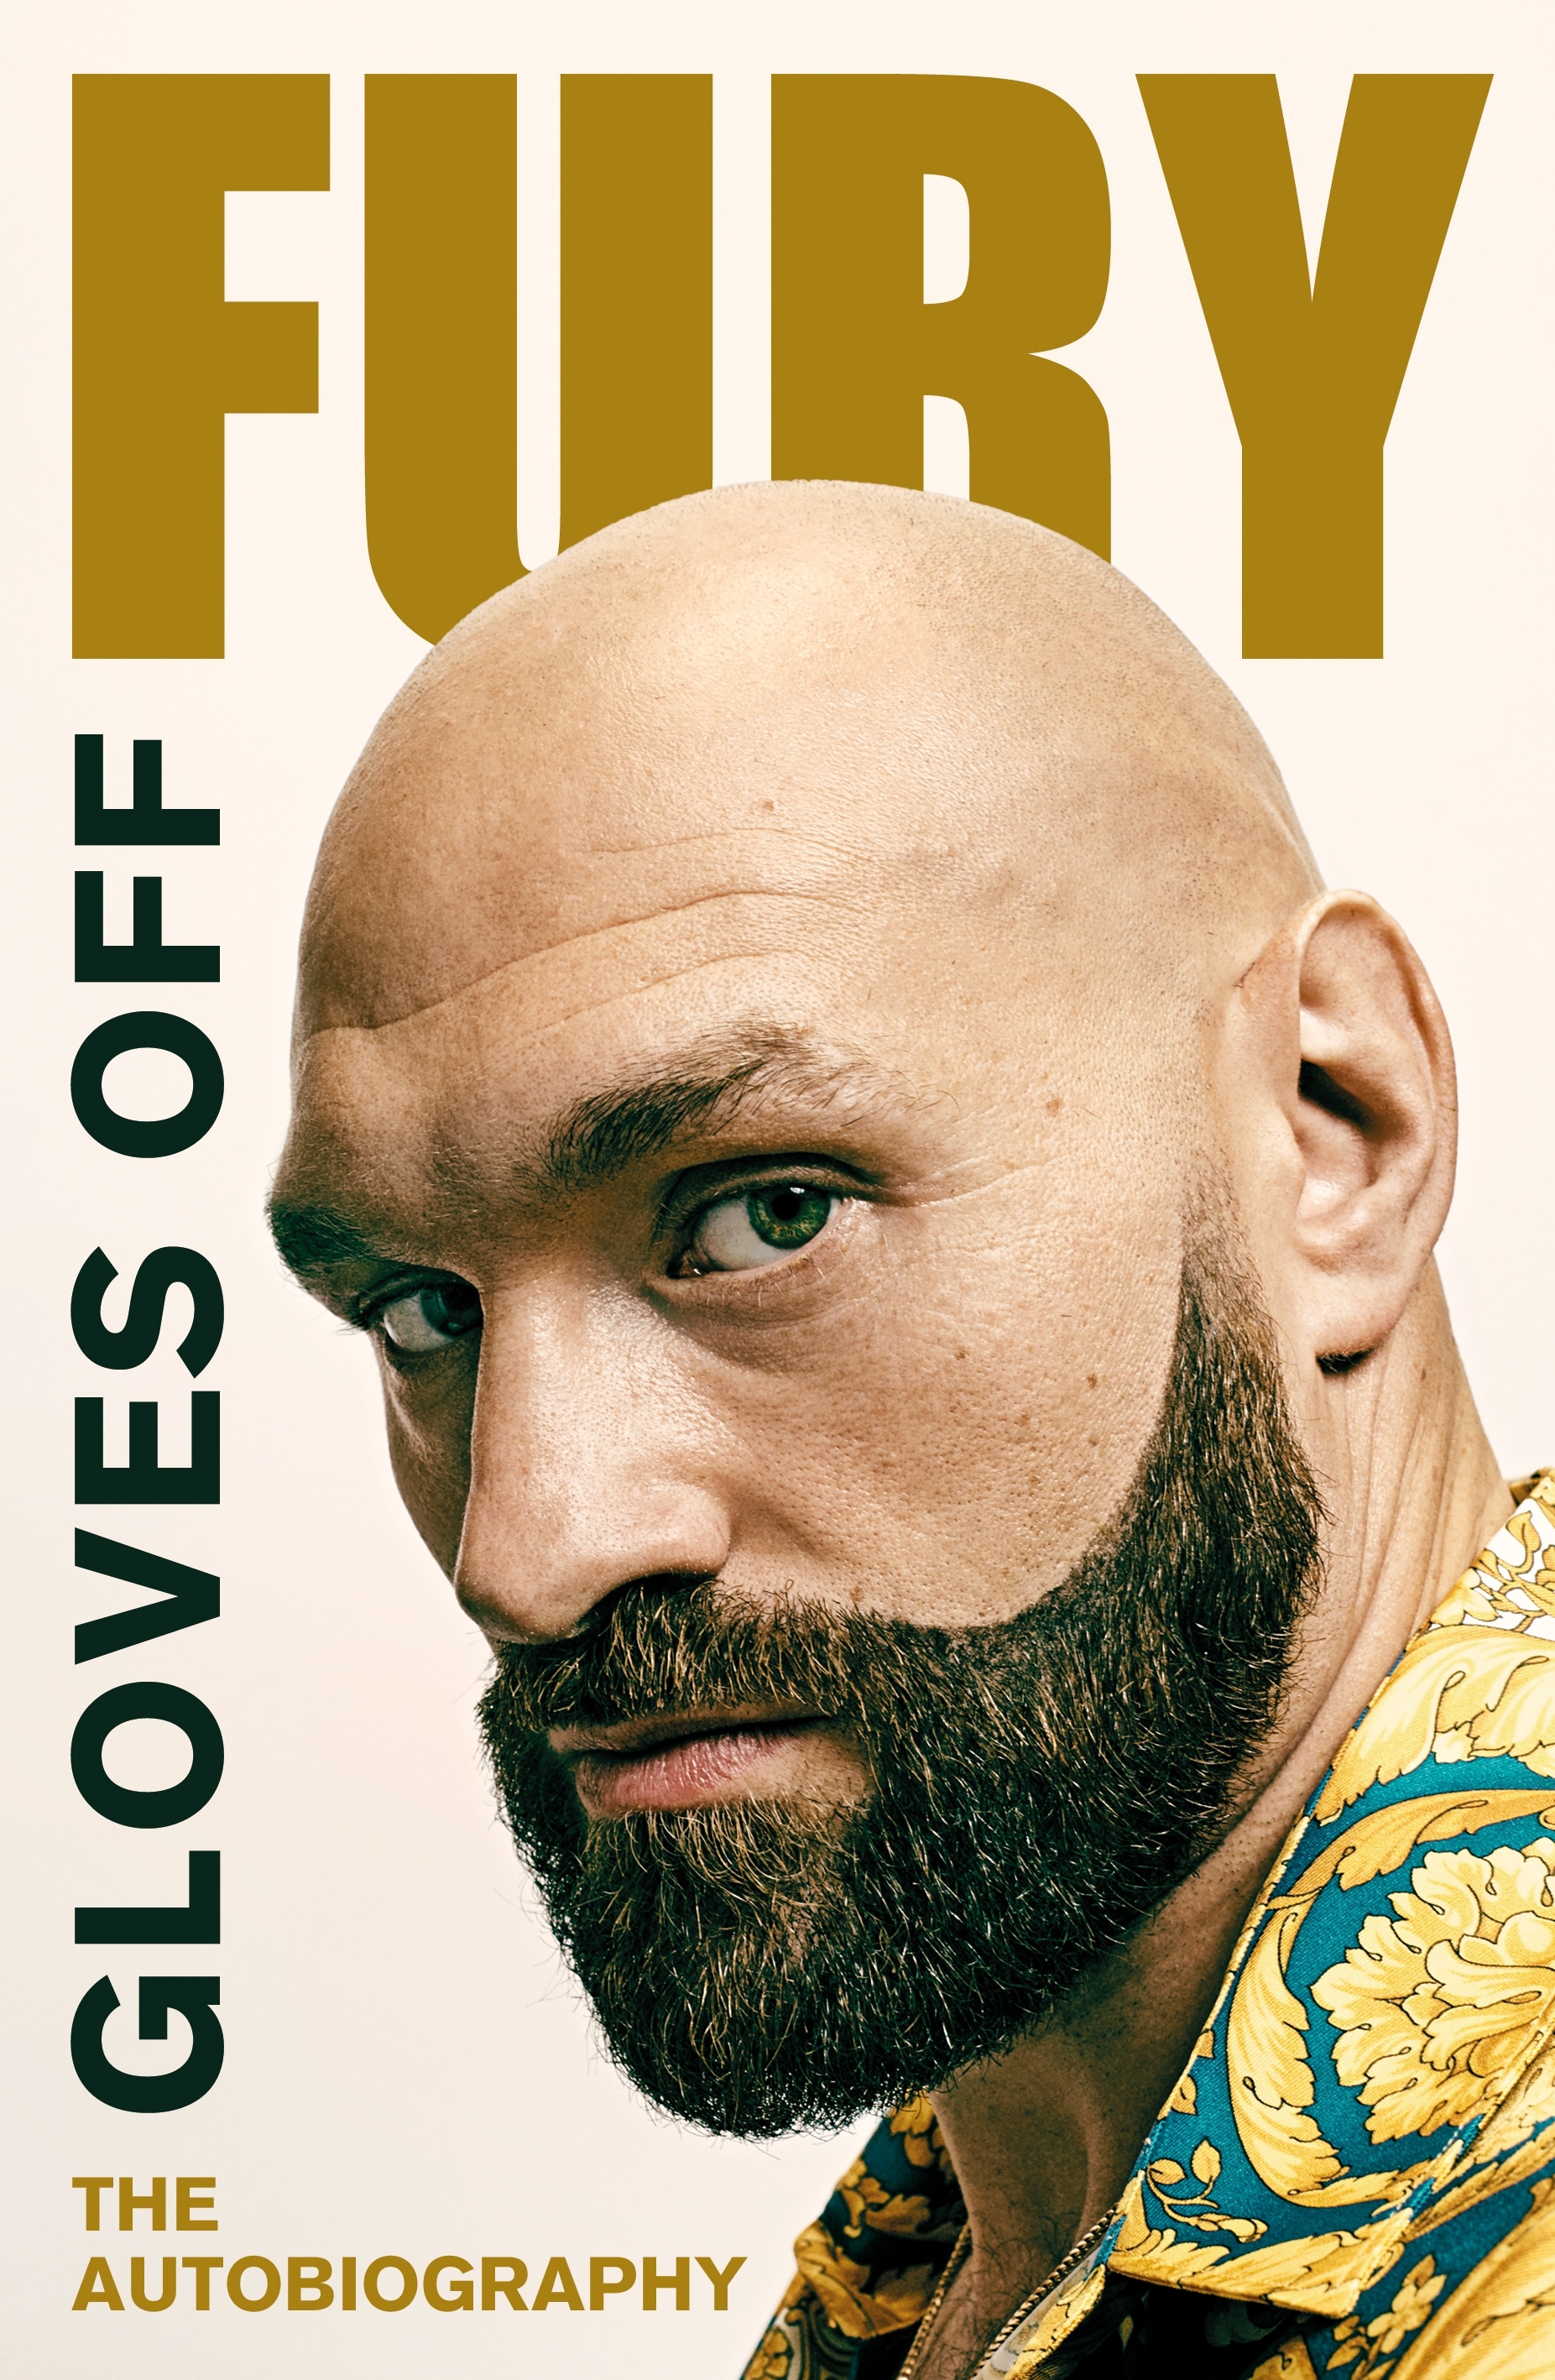 Book “Gloves Off” by Tyson Fury — November 10, 2022